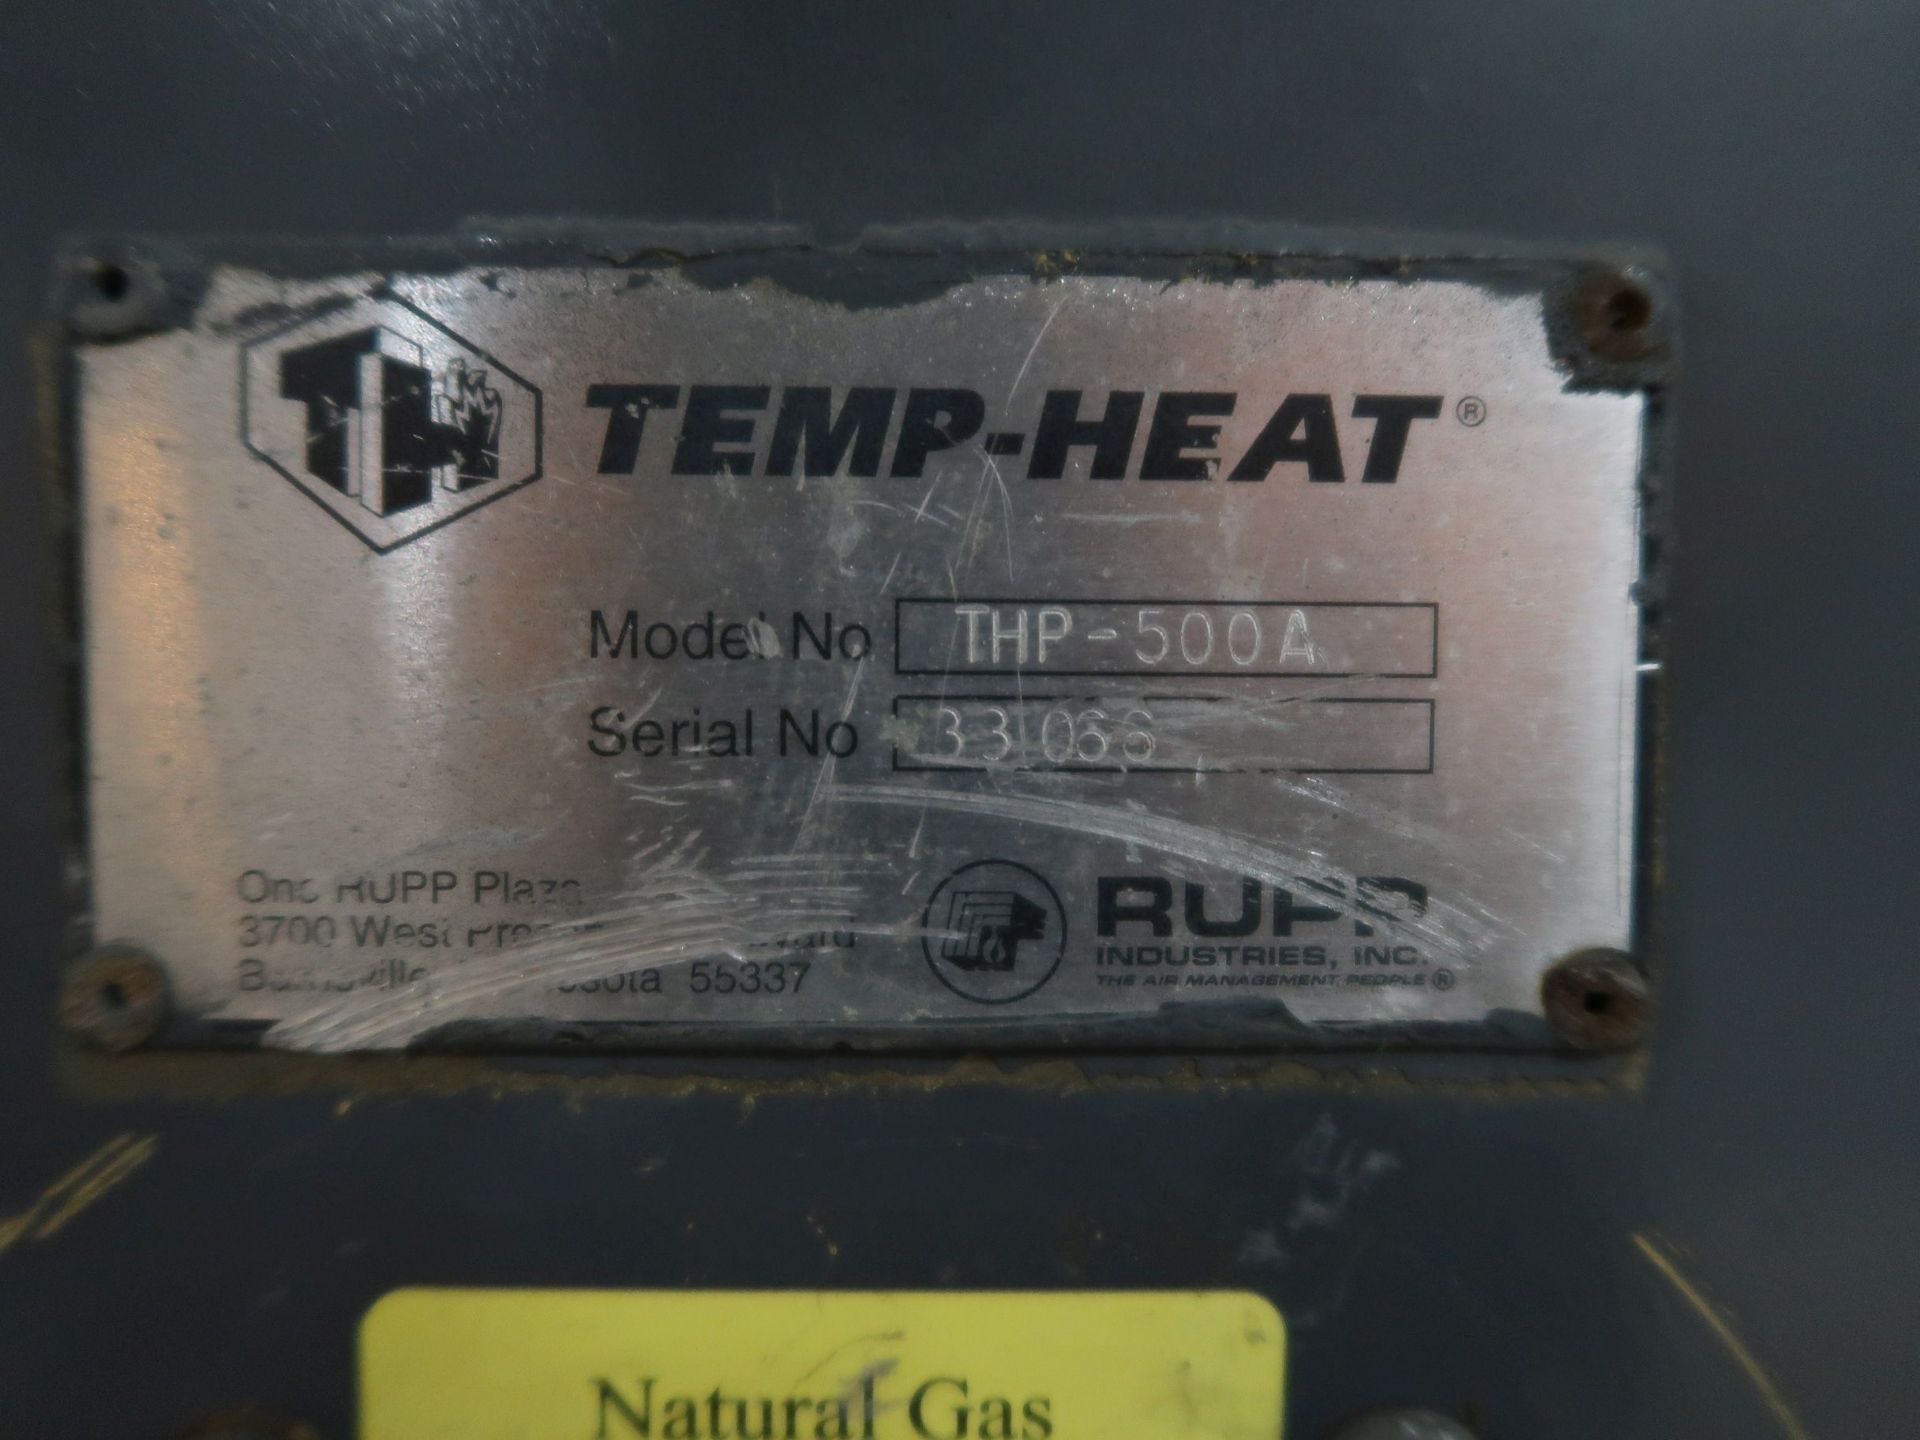 TEMP AIR MODEL THP-500A PORTABLE NATURAL GAS FIRED, FRESH AIR HEATER; S/N 33066, THERMOSTAT CONTROL - Image 6 of 6